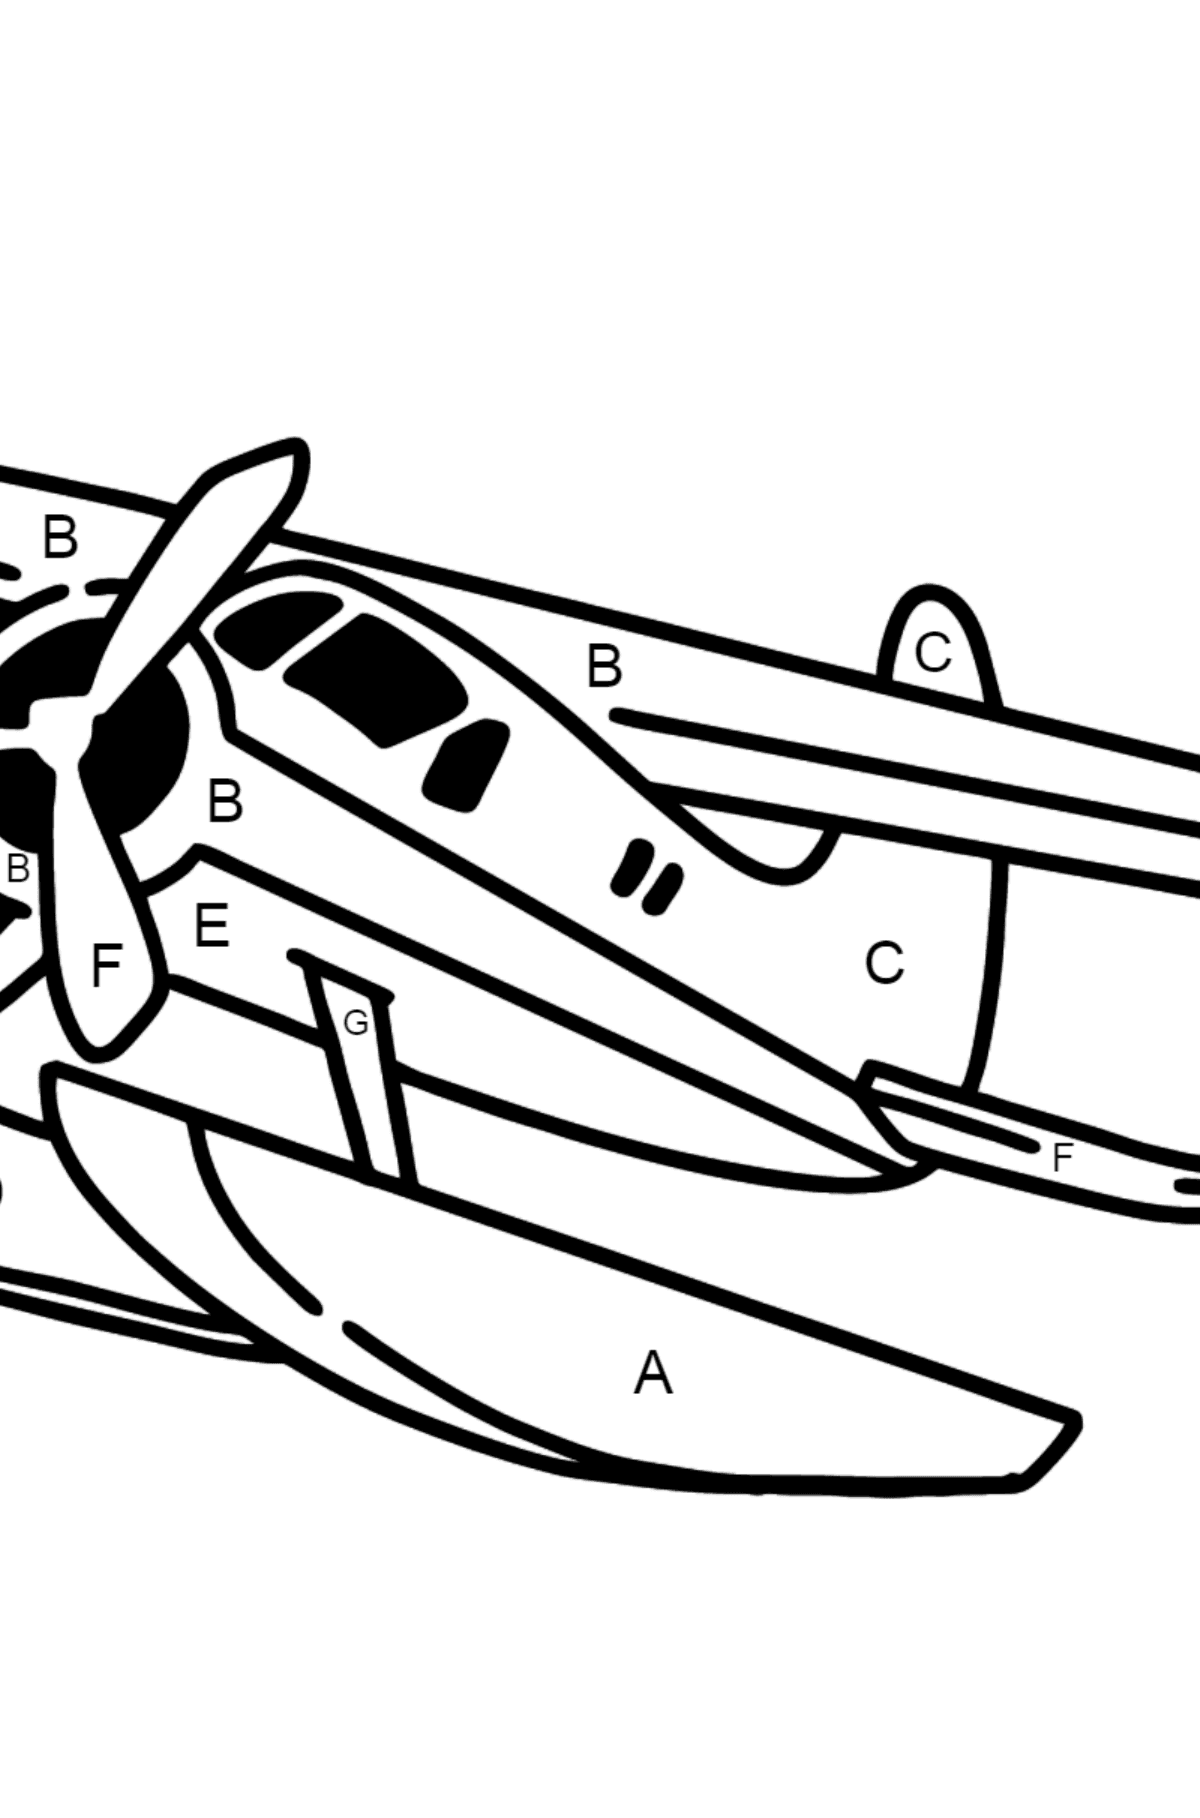 Jet Airplane BE-200 coloring page - Coloring by Letters for Kids